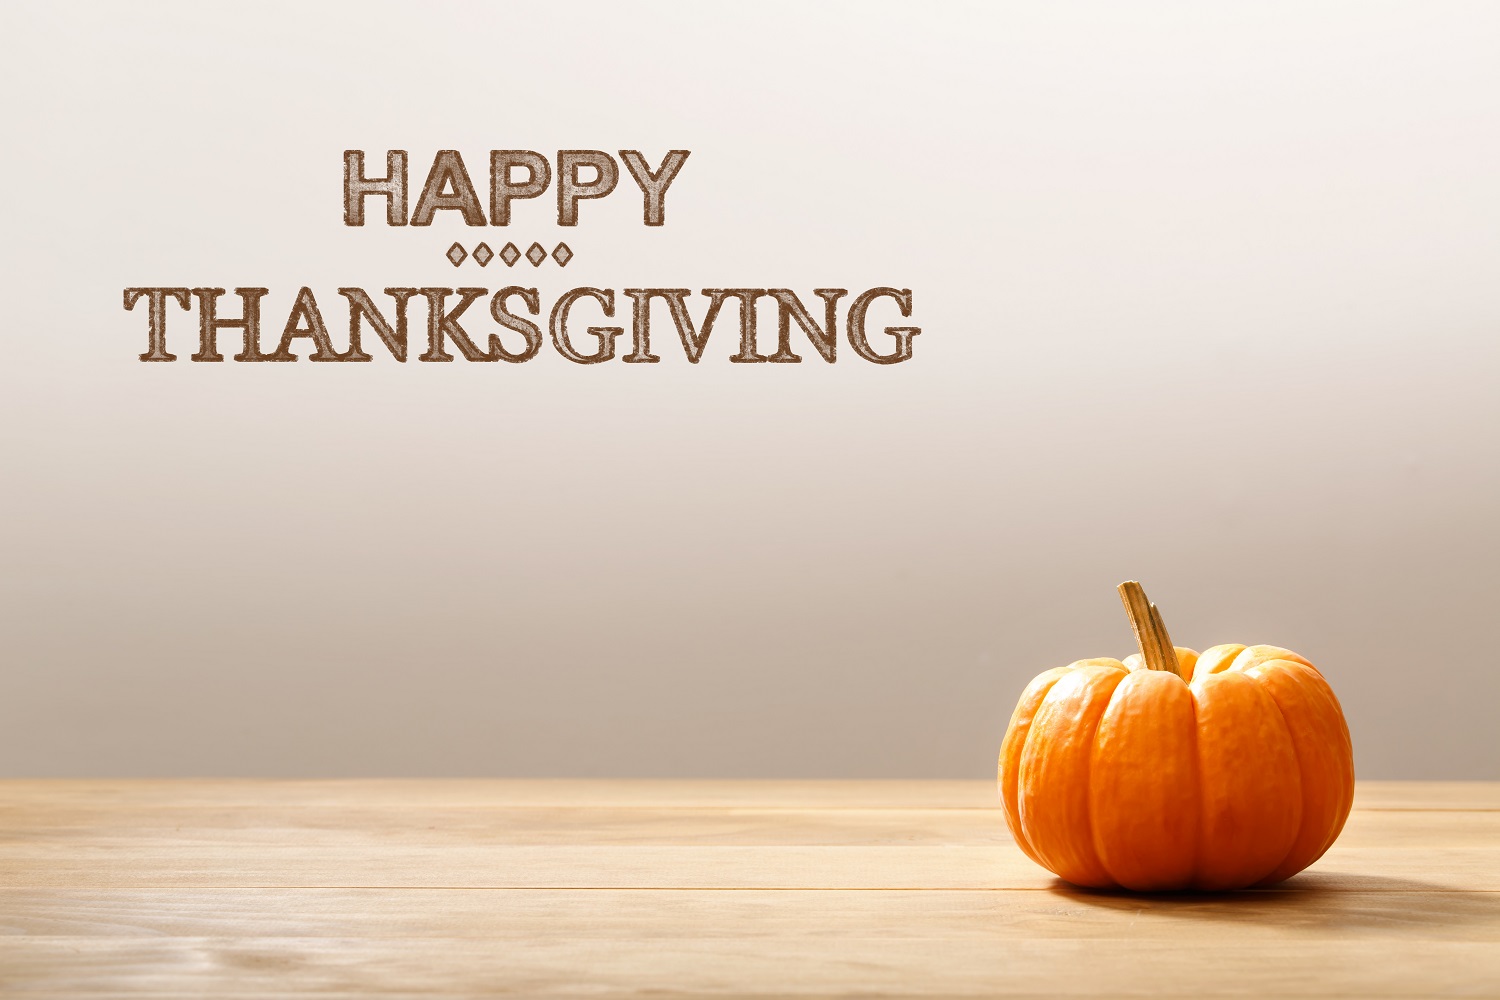 Happy Thanksgiving from our Greensboro Personal Injury Team